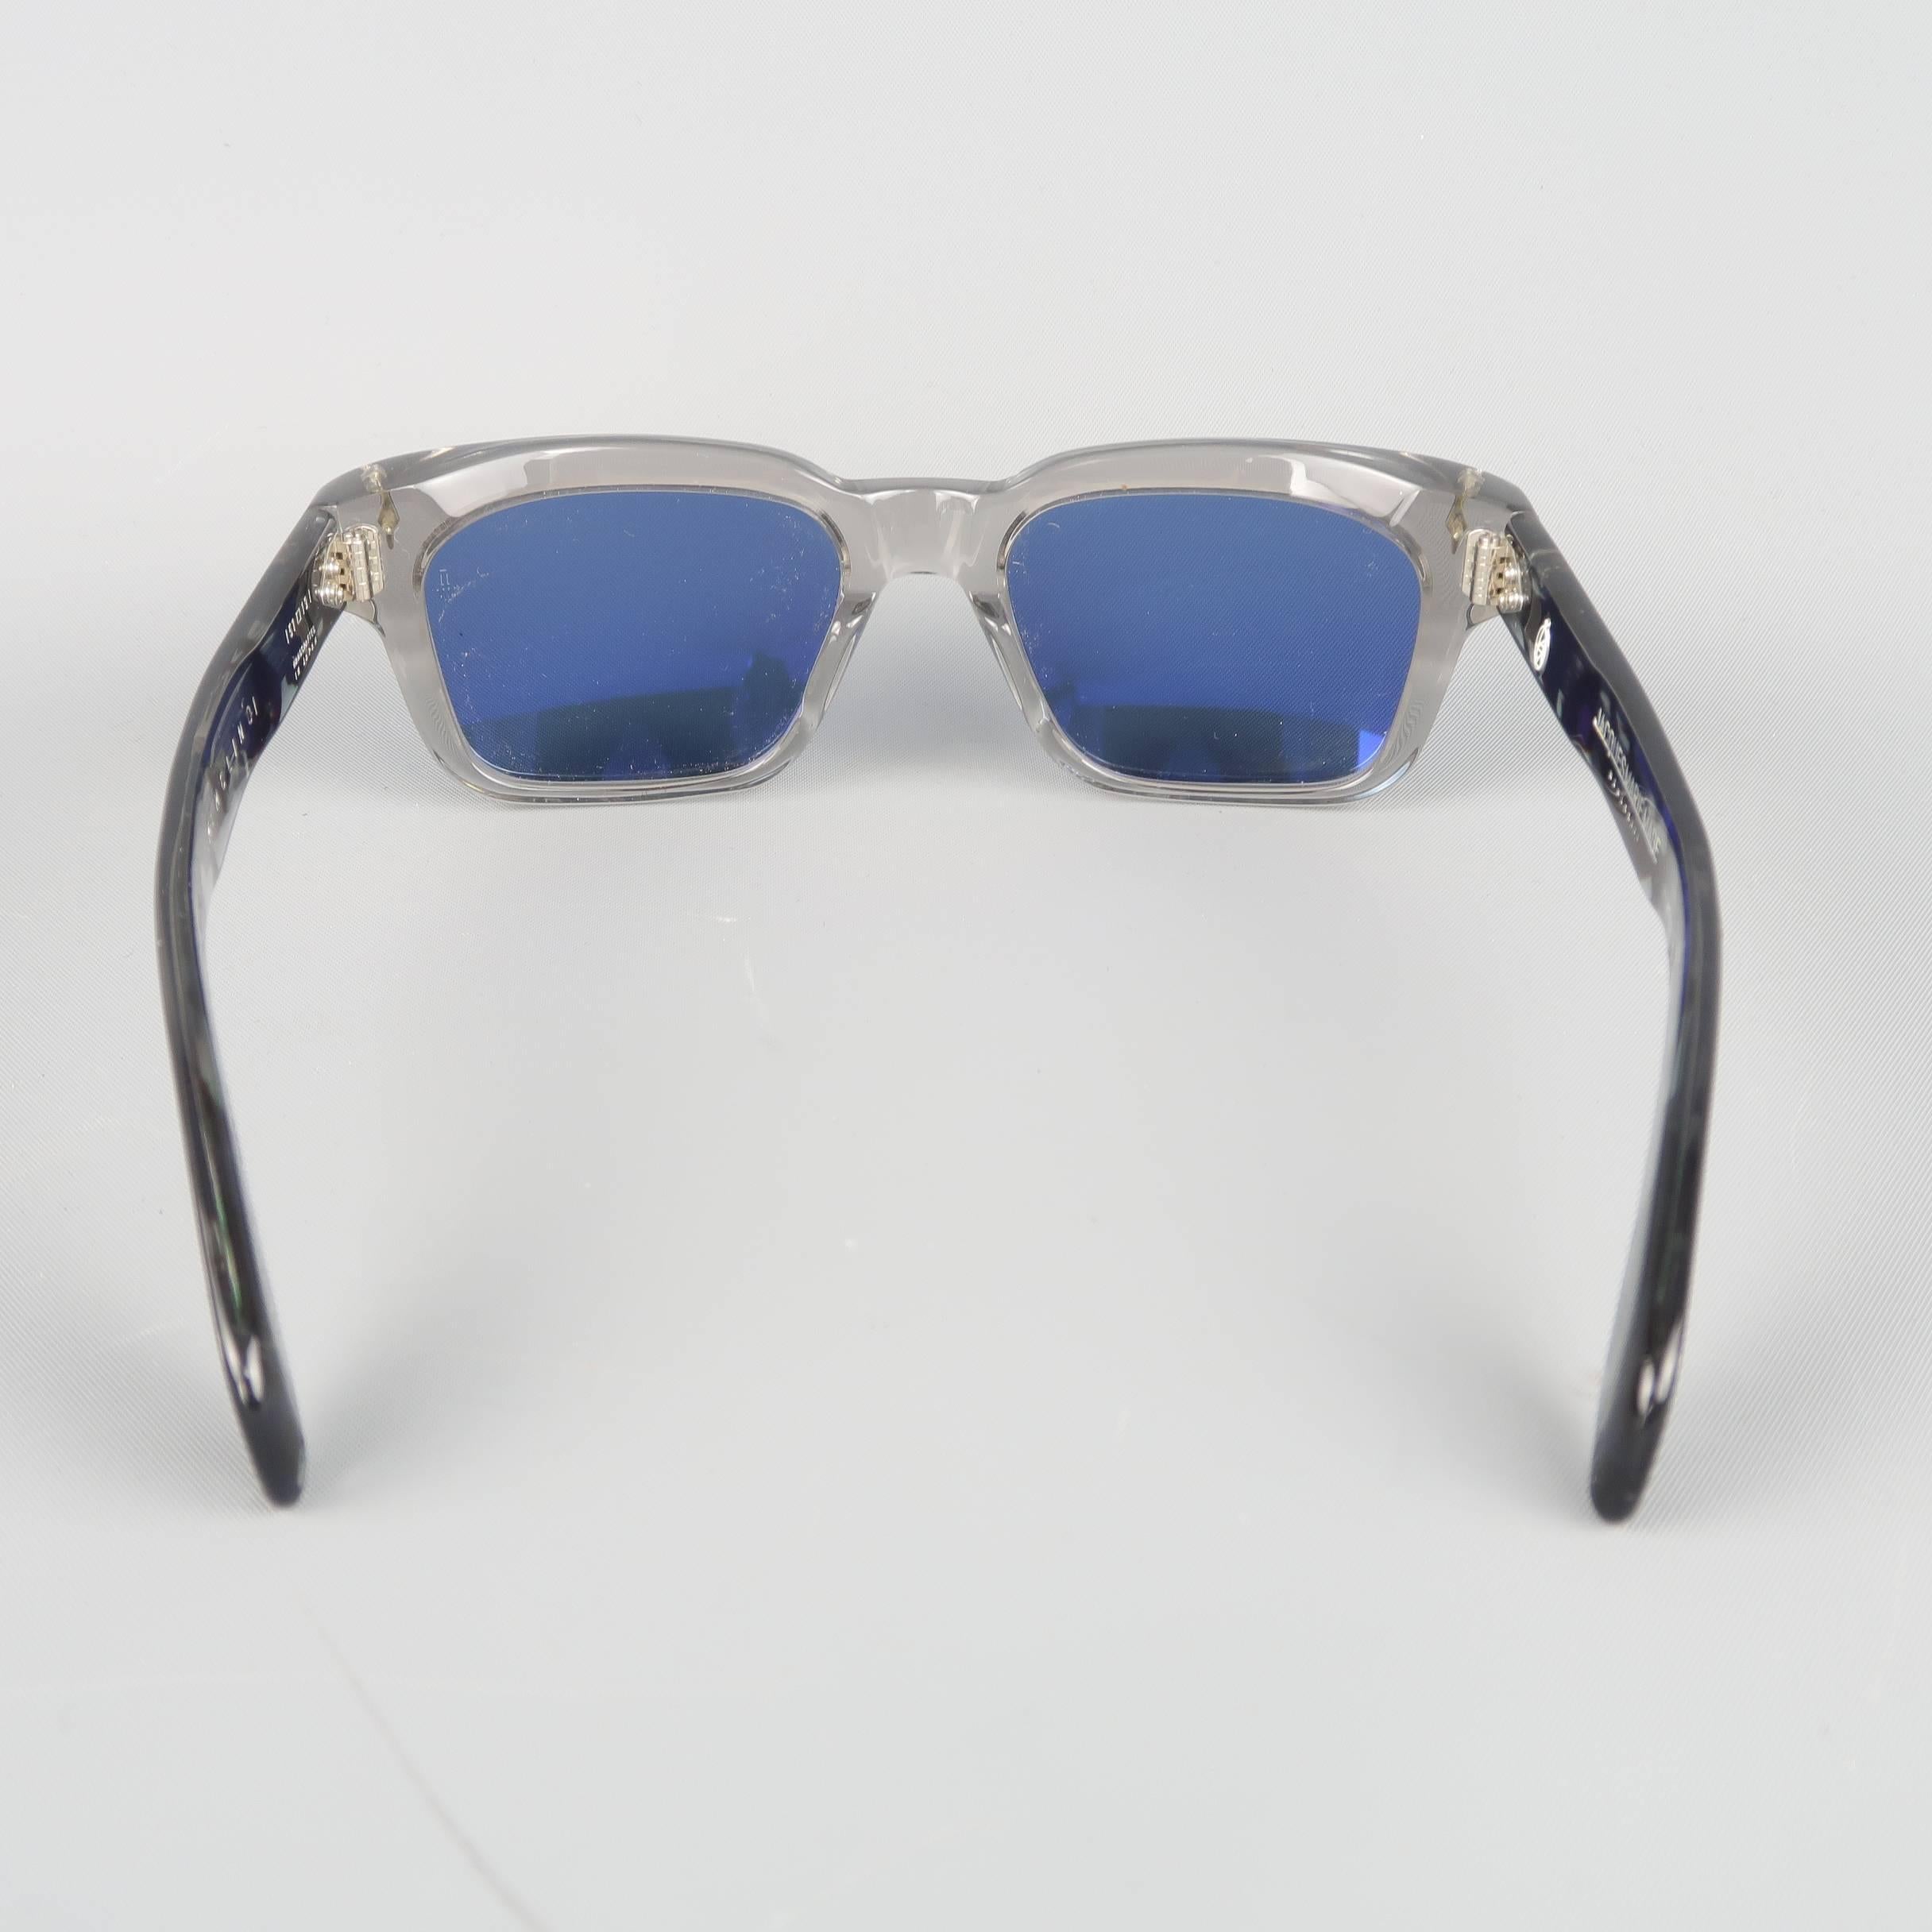 JACQUES MARIE MAGE wayfarer style sunglasses features a clear gray front with blue tone lenses and blue shell–colored acetate arms. With Case and box. Handcrafted  in Japan.
 
Good Pre-Owned-Condition.
Marked: JMMNL 1 6   (No.65 of 250)
 
Width: